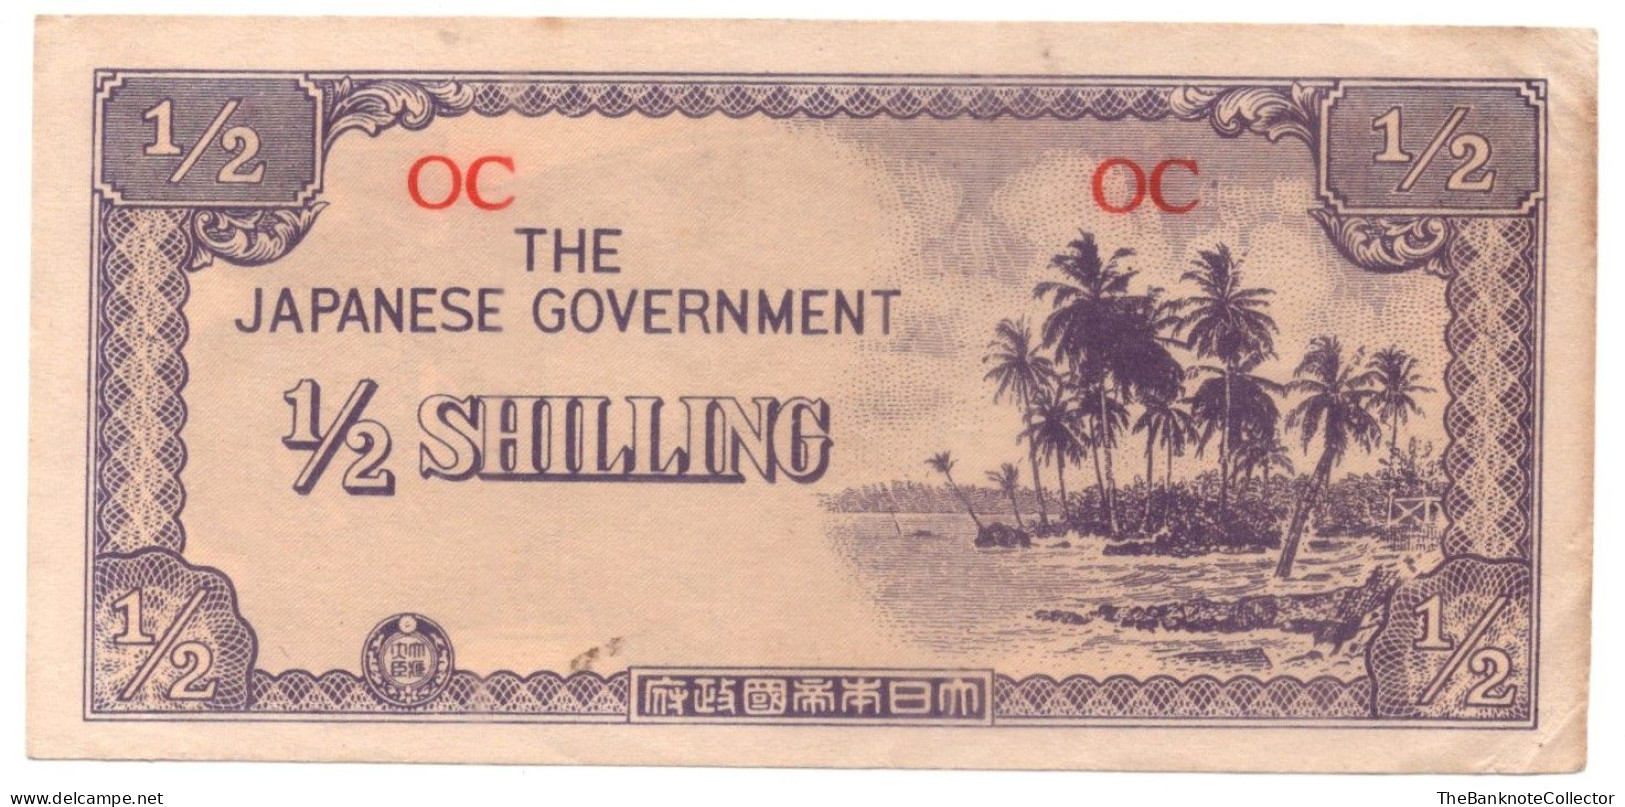 Japan Government Occupation JIM Oceania 1/2 Shilling WWII ND 1942 P-1 EF - Japon